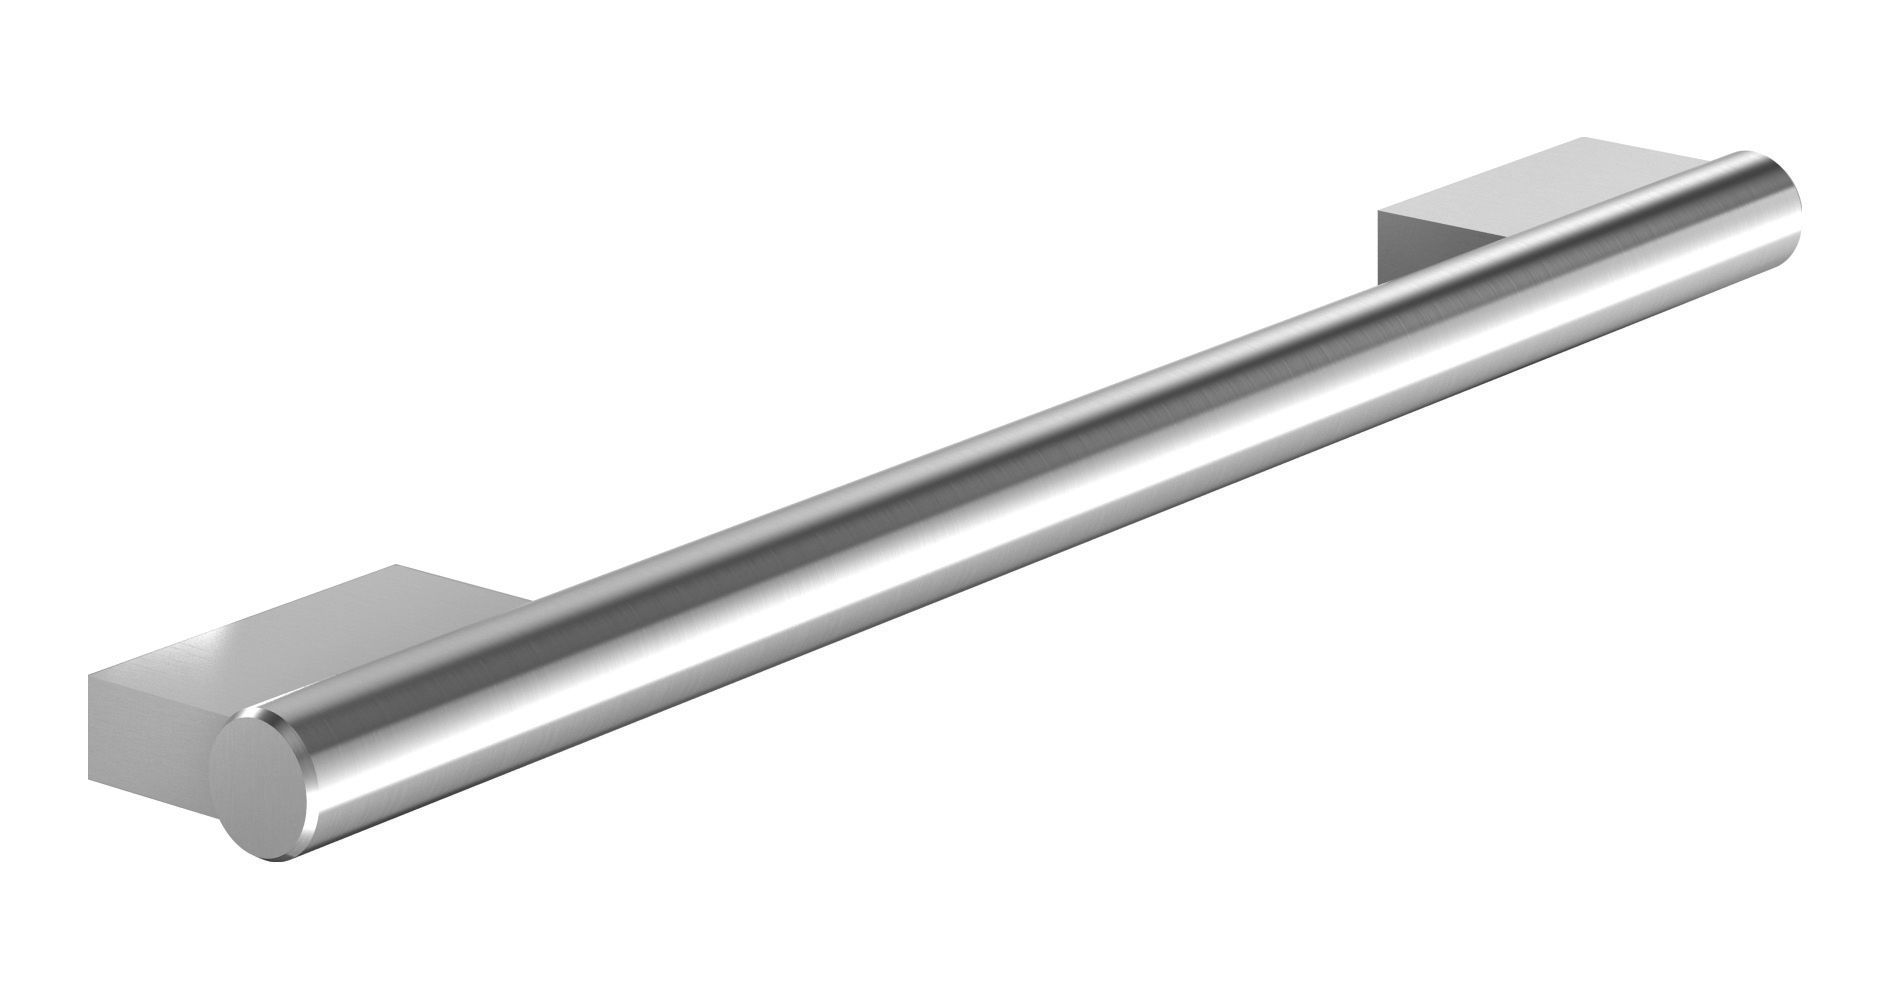 Image of Wickes Adeline Keyhole Bar Handle - Stainless Steel Effect 224mm